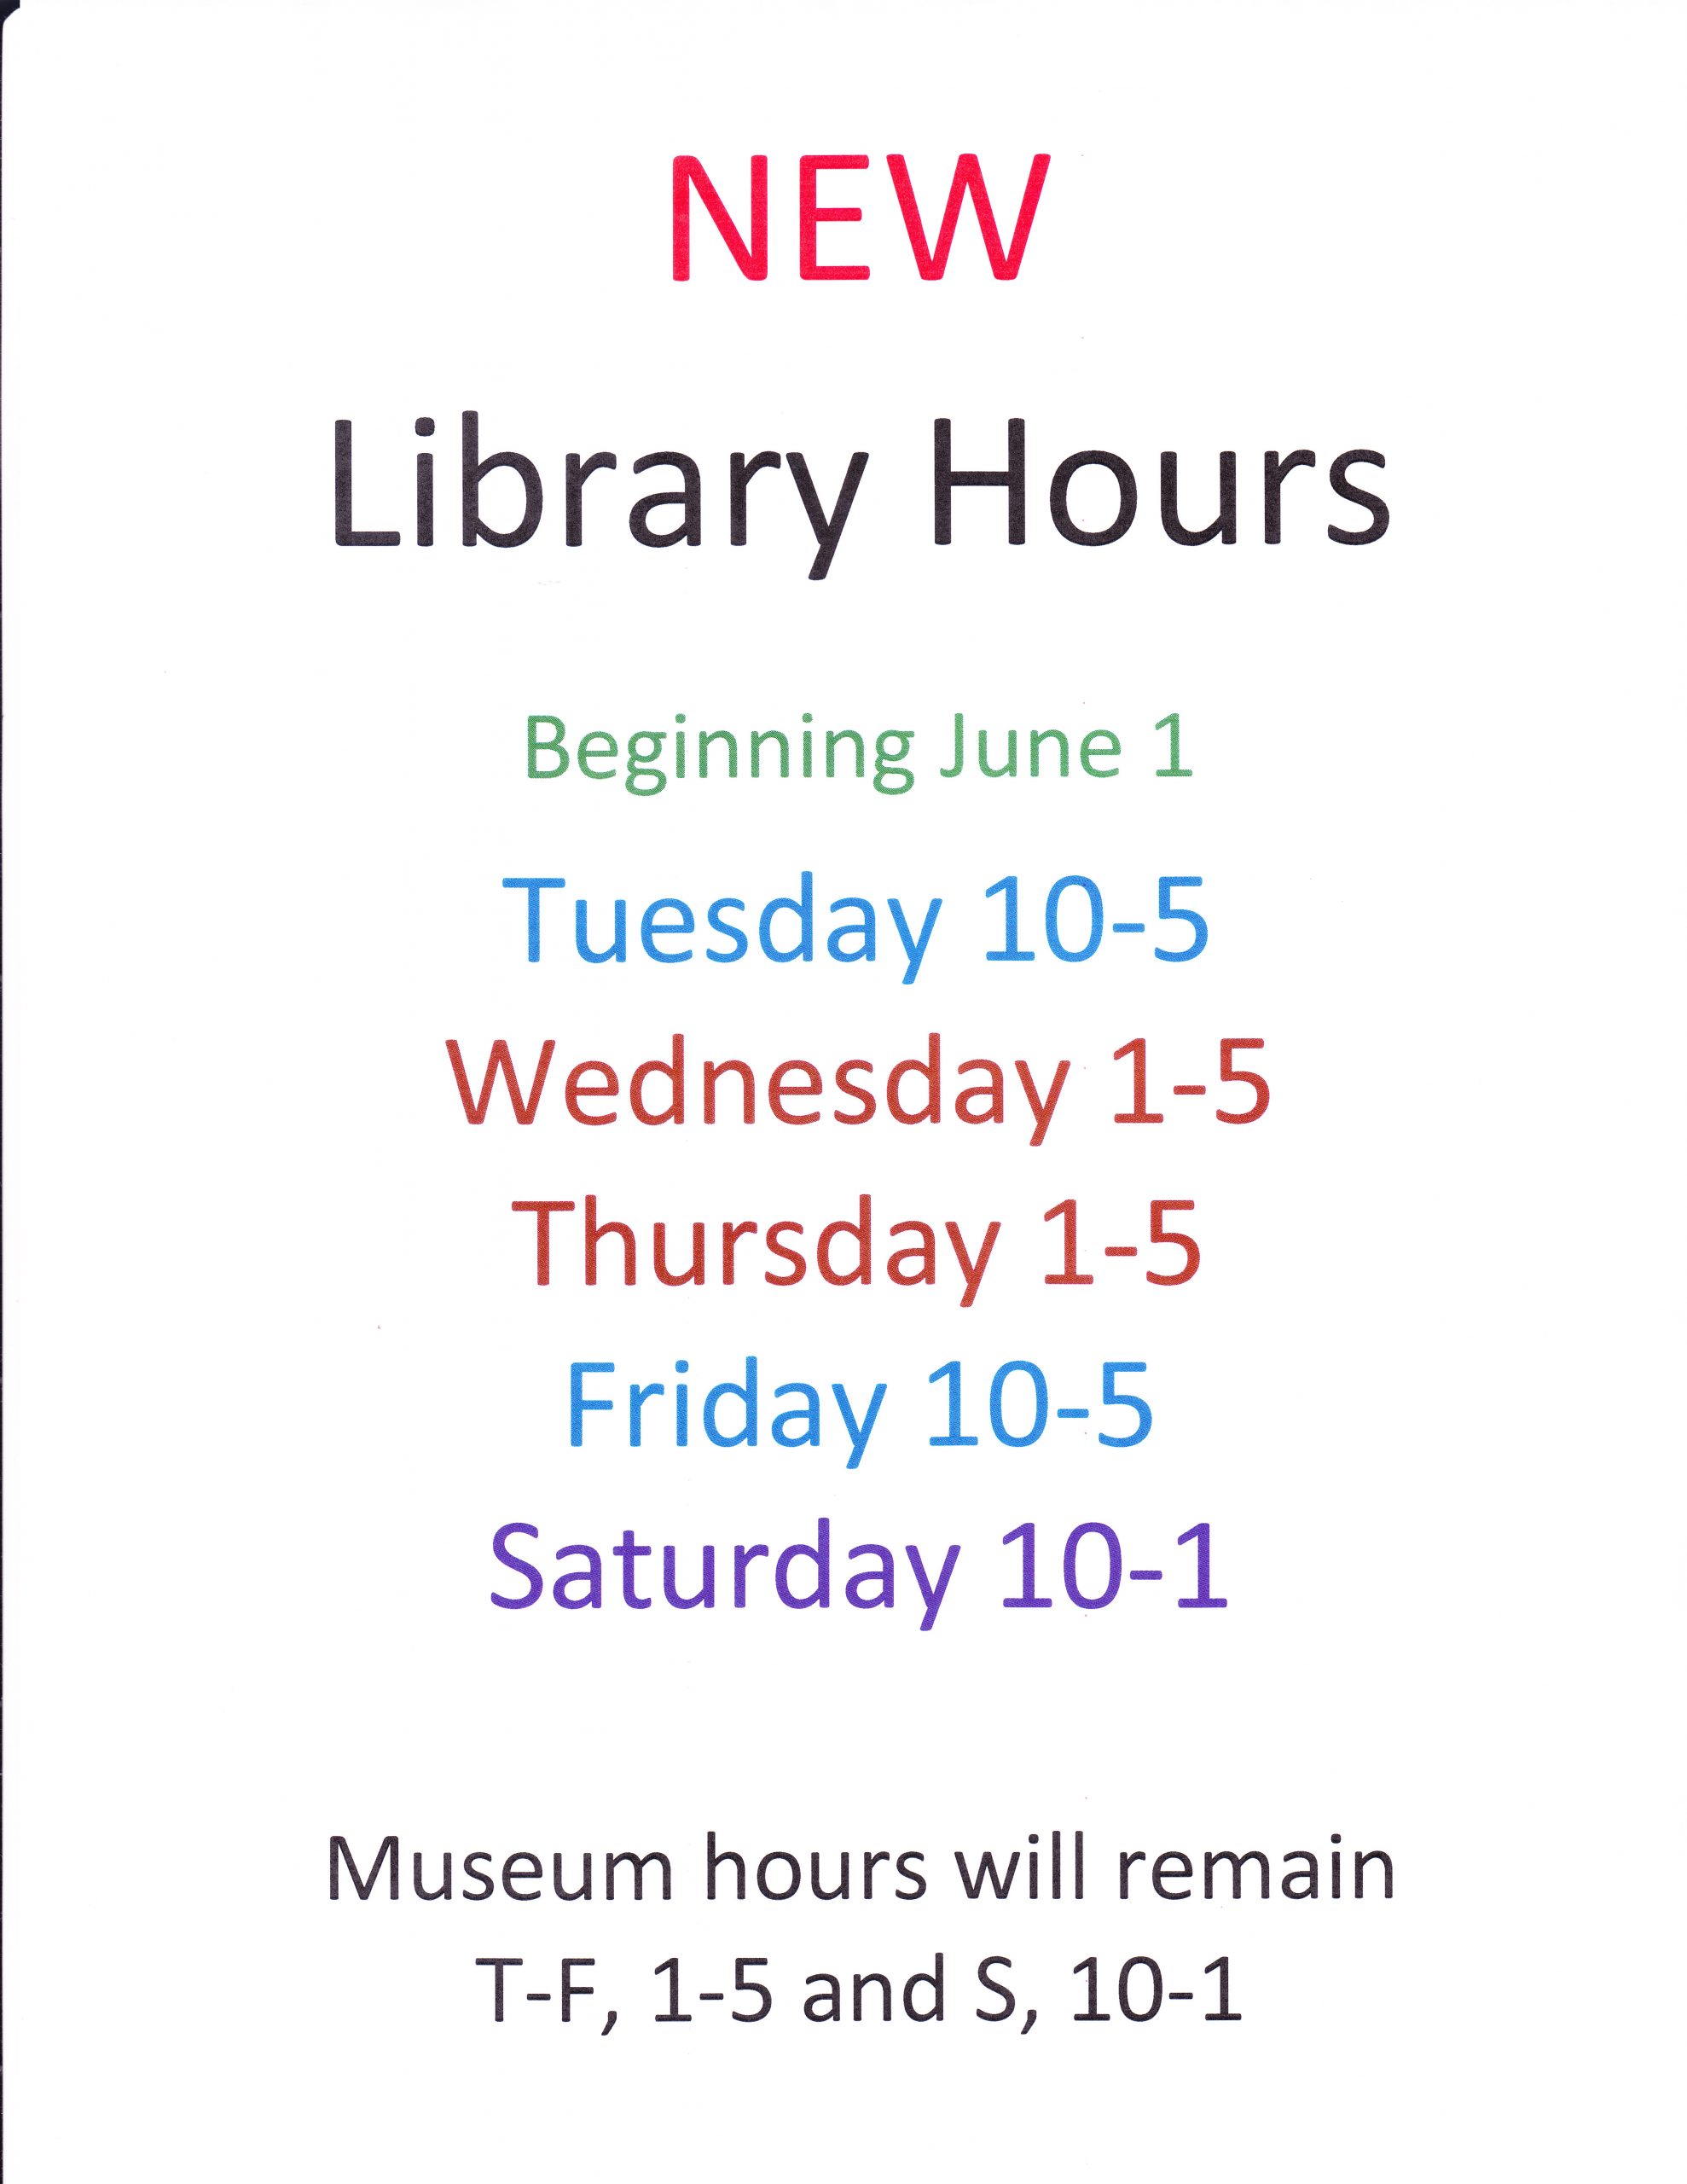 New library hours Pember Library